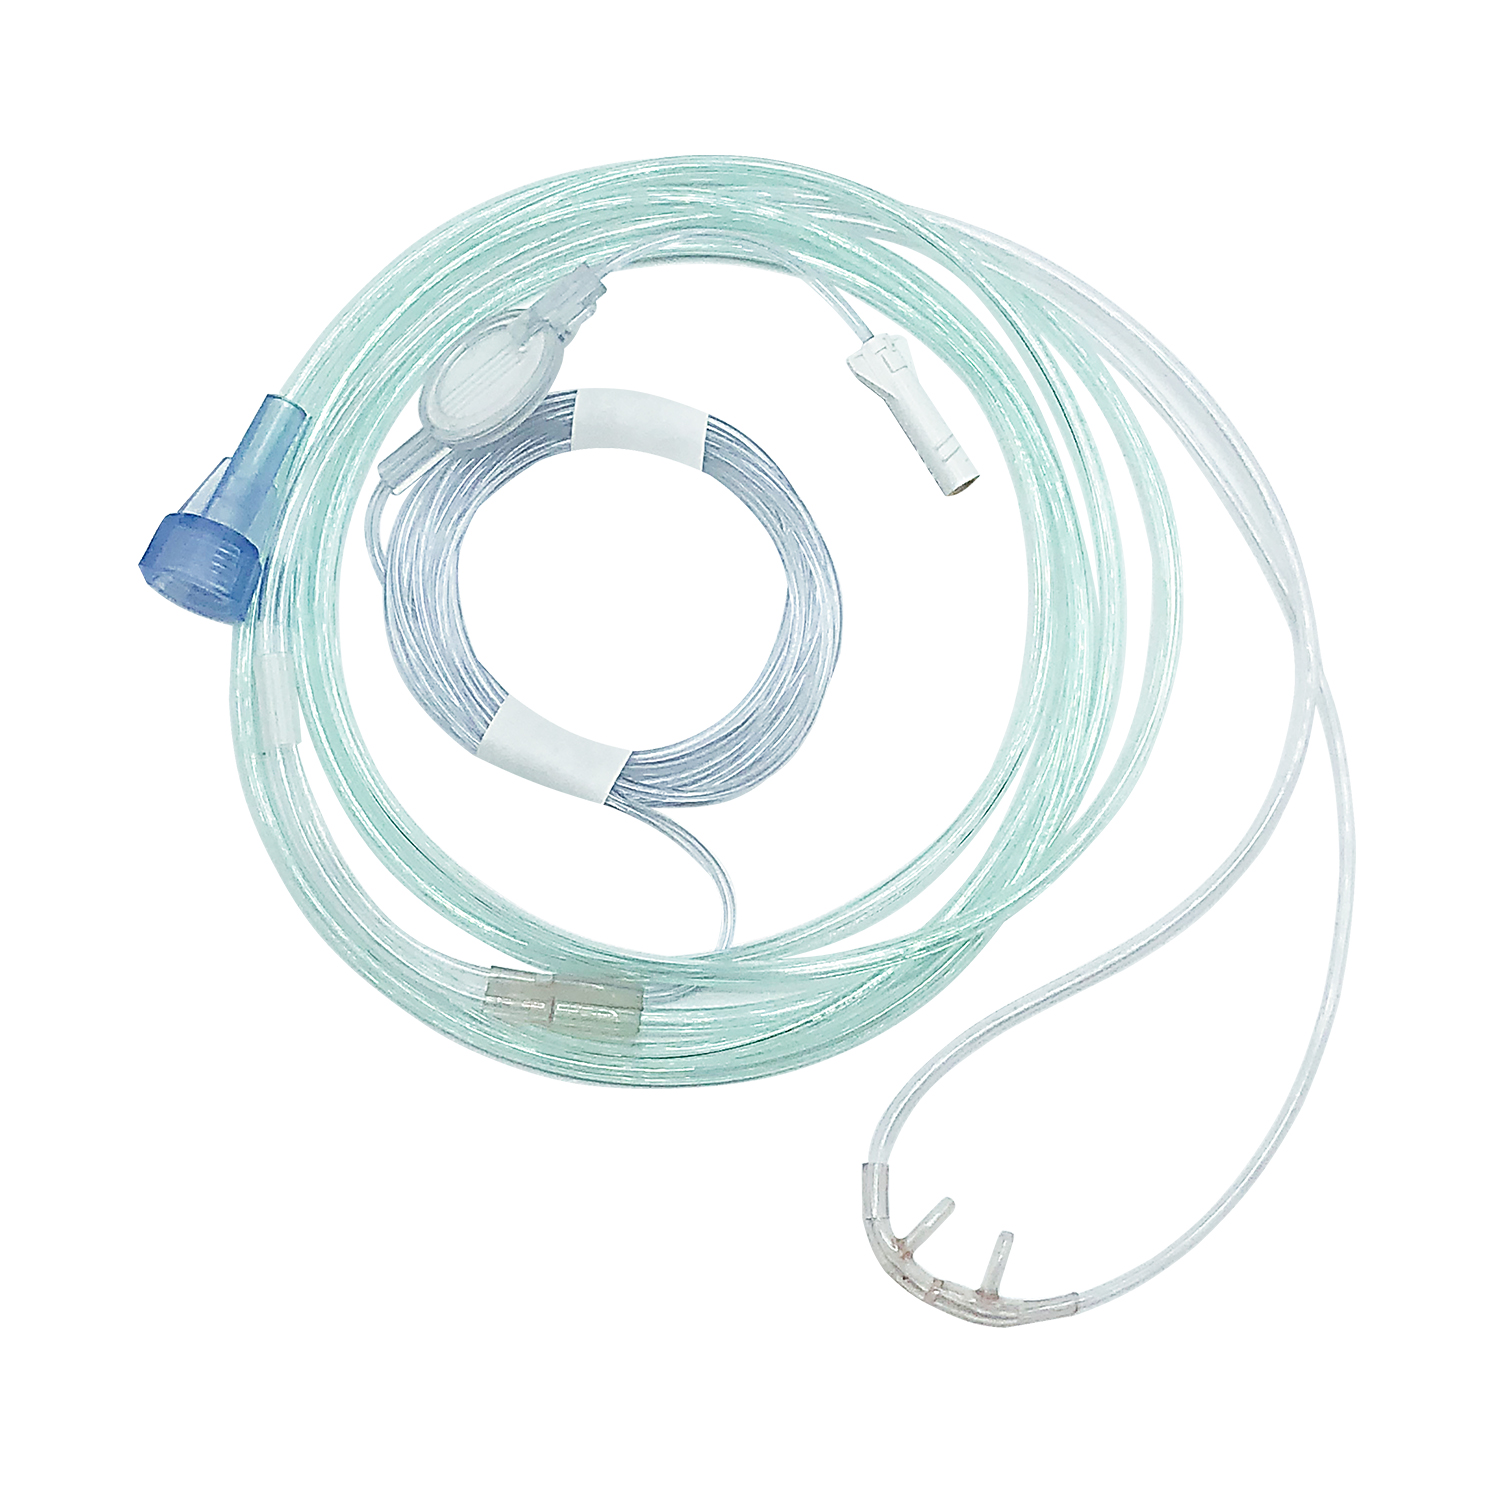 ETCO2 Cannula with Reflective Connector - Microstream Compatible